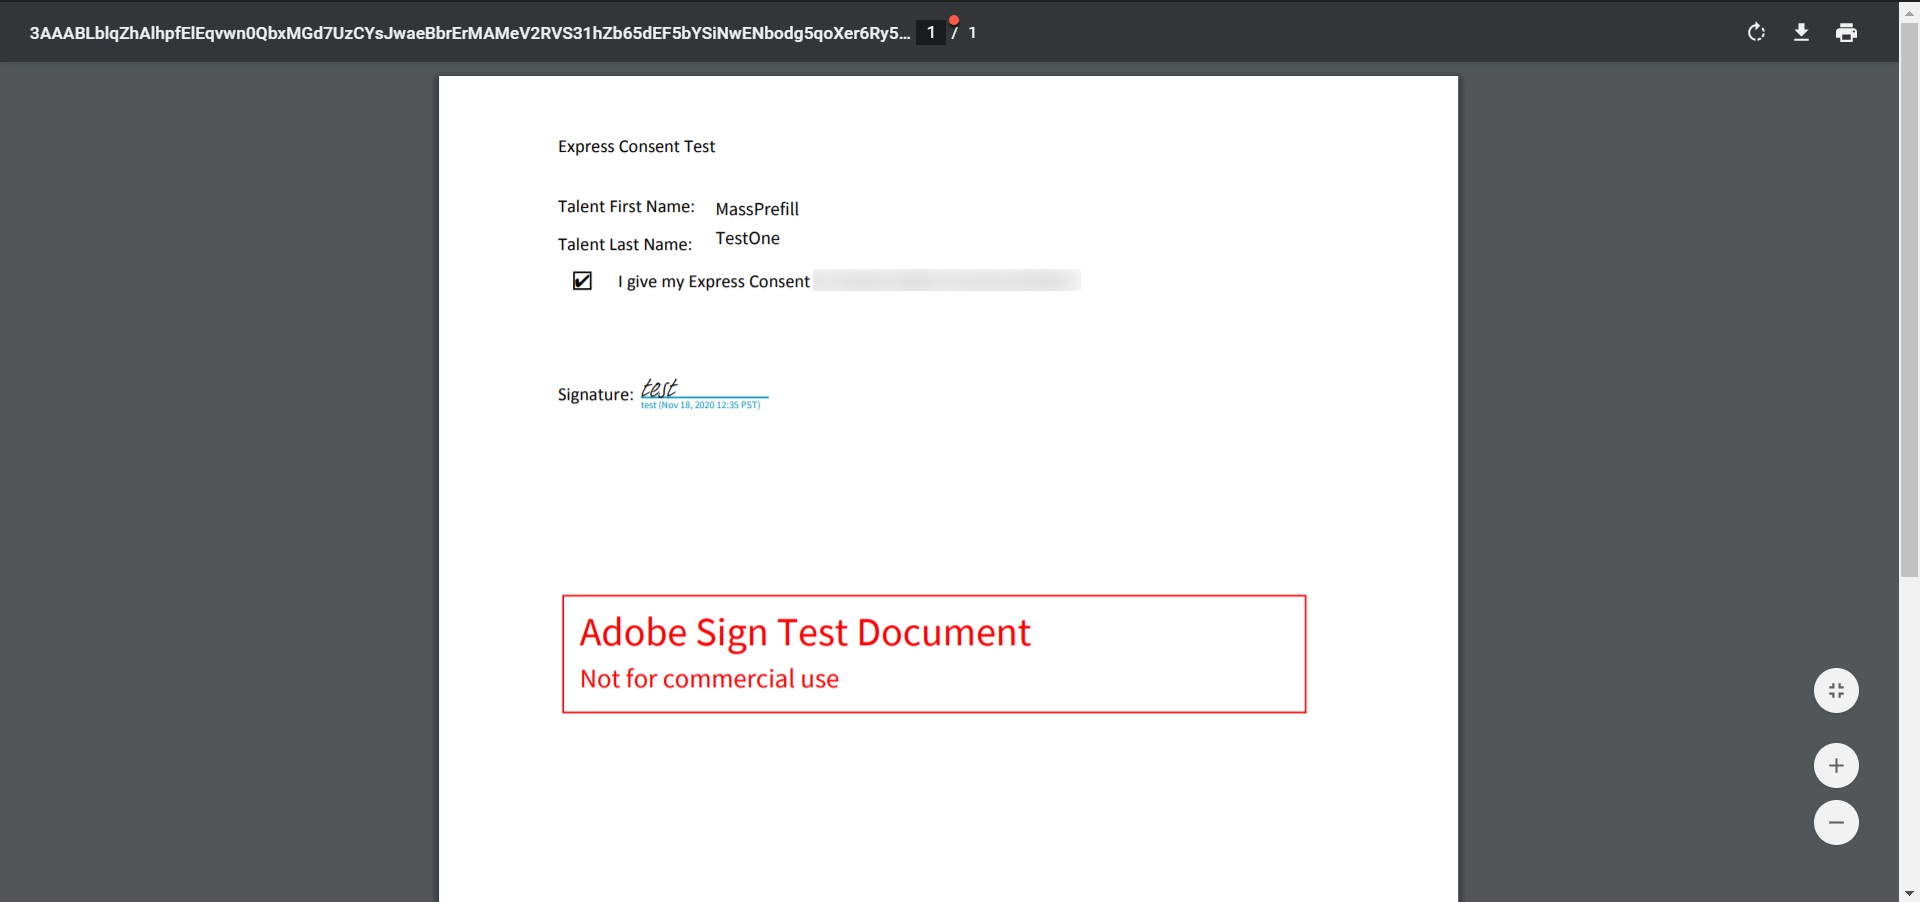 Adobe_Sign_Test_Document.png